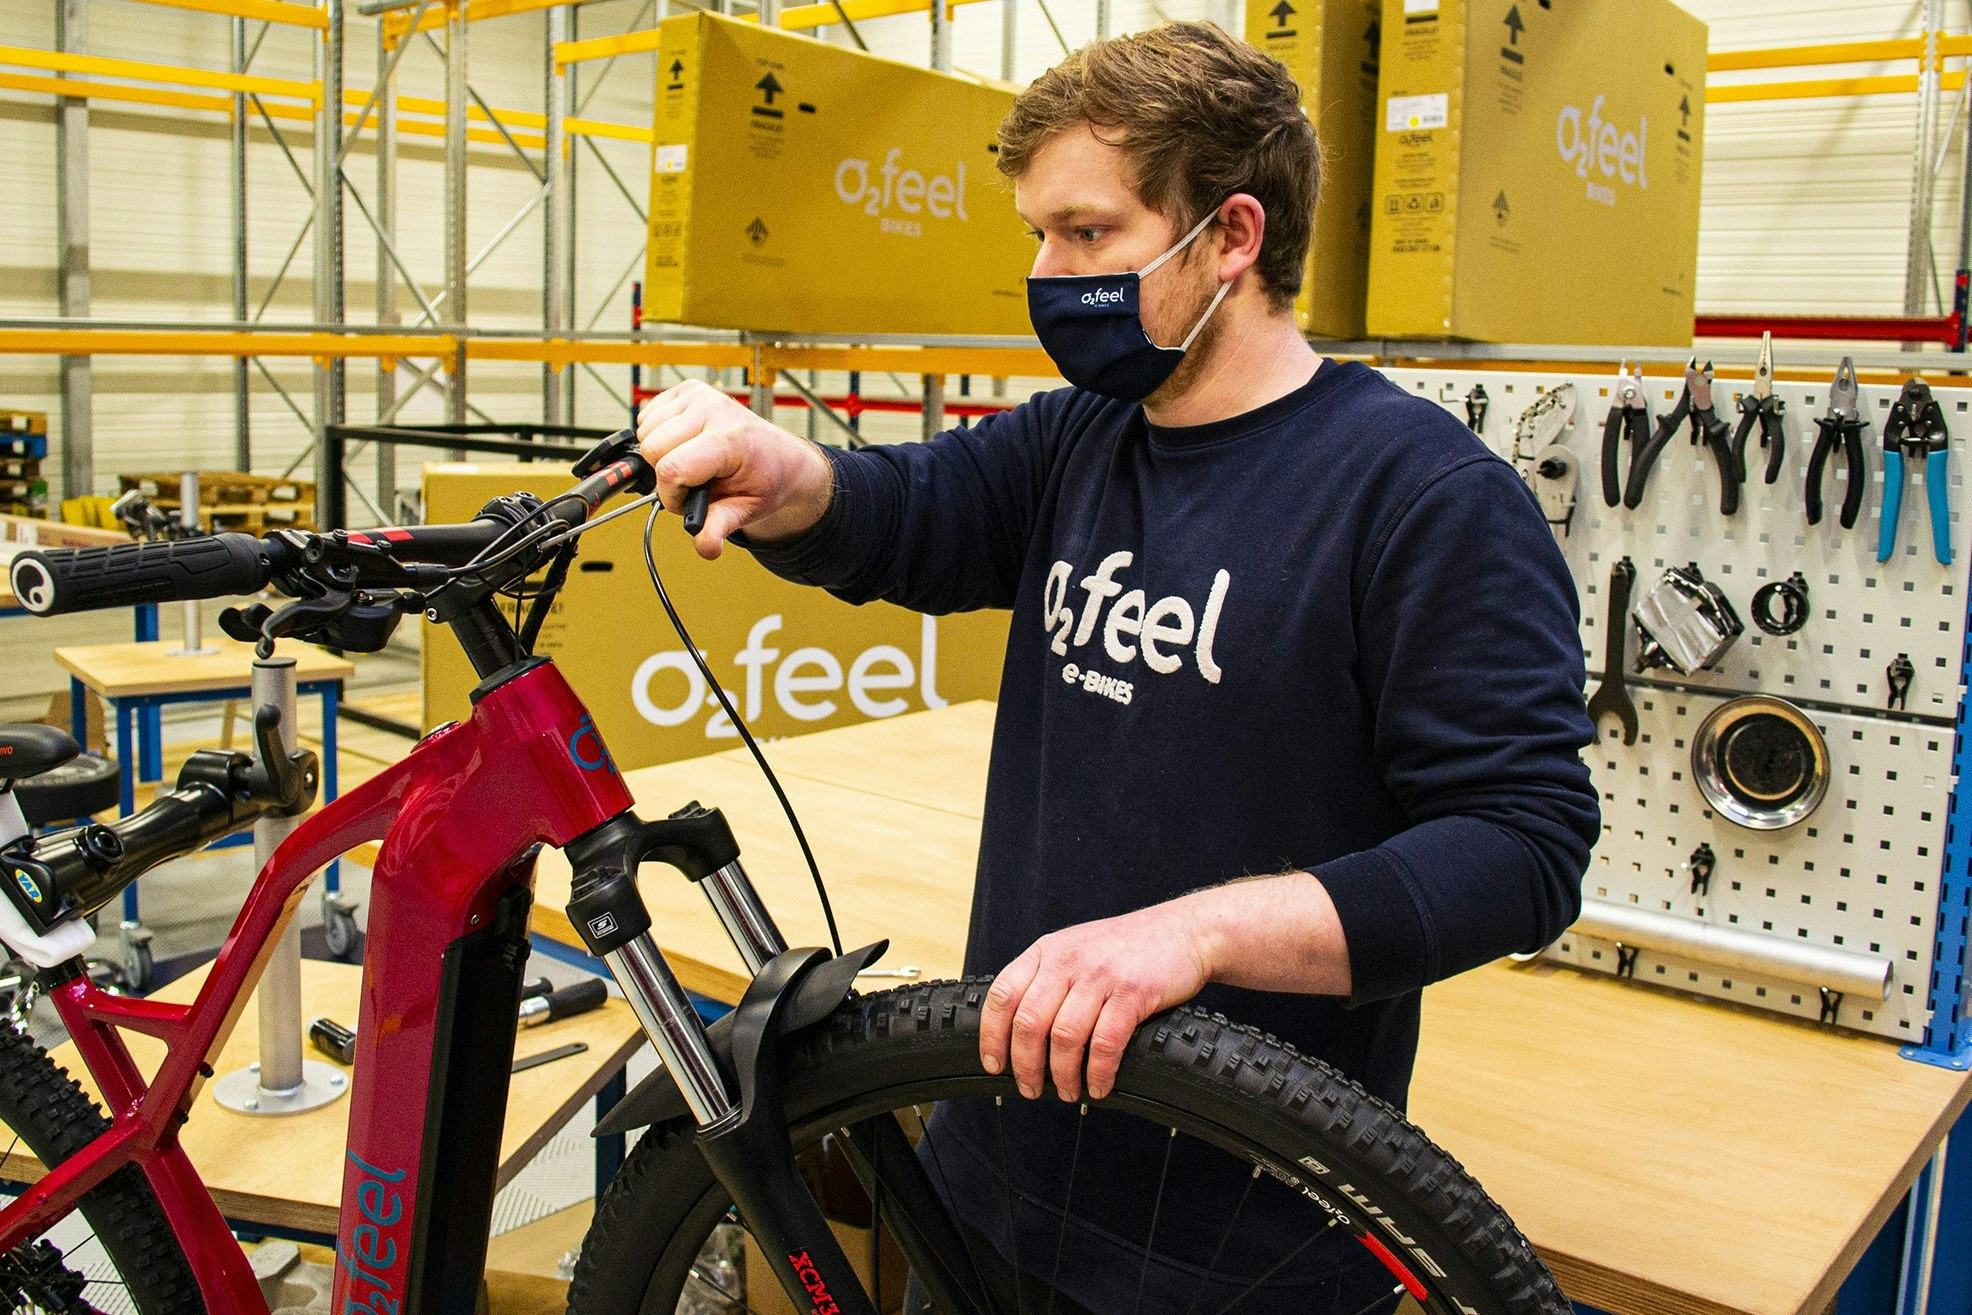 O2Feel sold 25,000 units in 2020 and is now targeting 36,000 e-bikes for this year. The company will inaugurate its first assembly line at the end of year. - Photo Michel de Chavanon